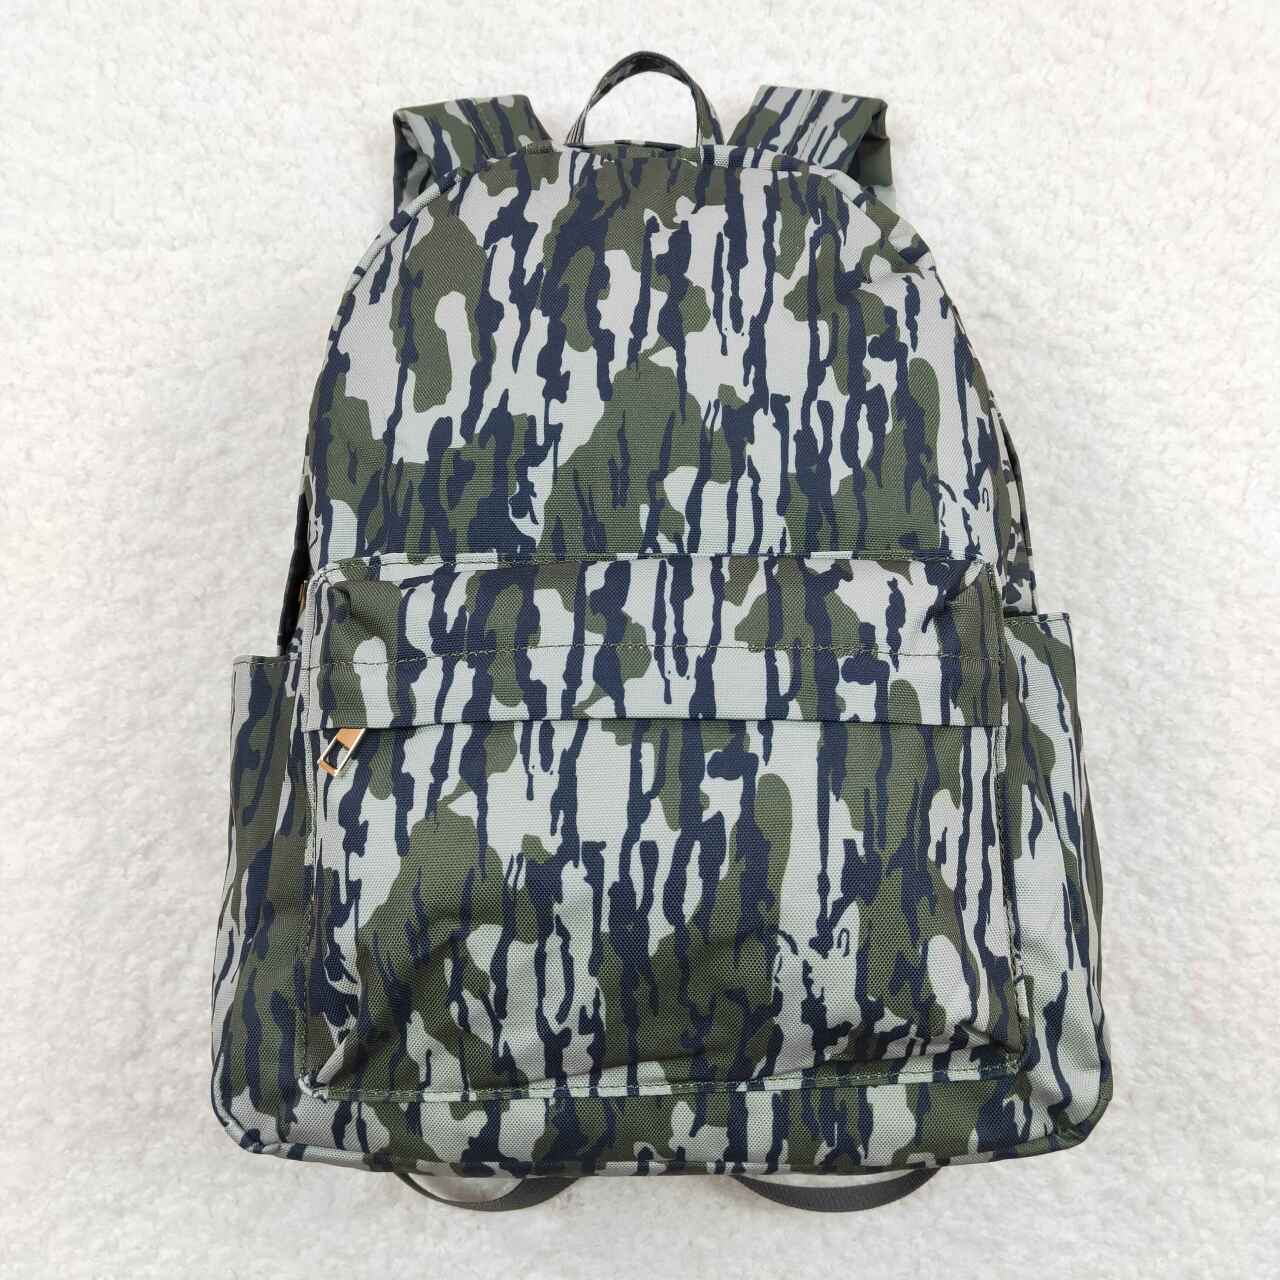 BA0158 Camouflage Army Green Backpack